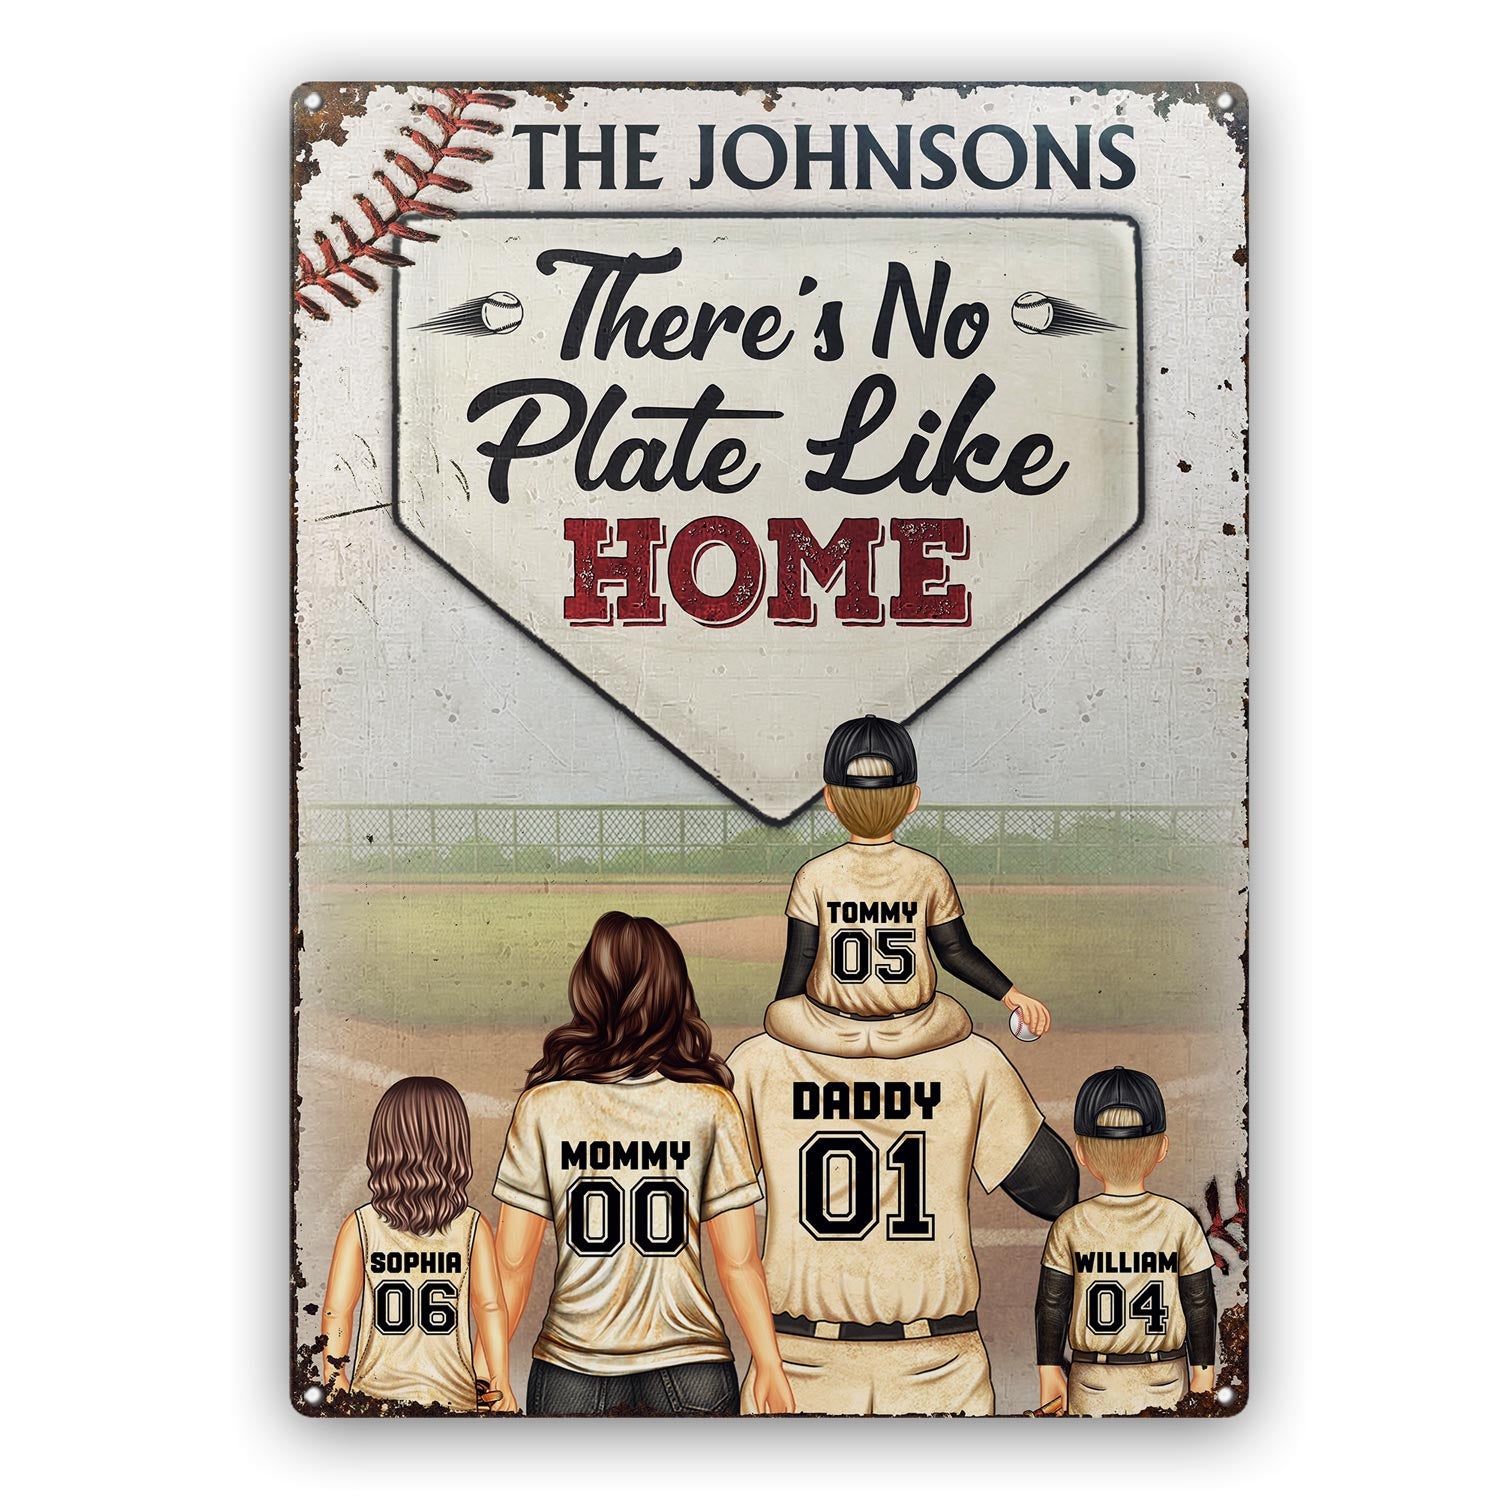 There's No Plate Like Home - Gift For Family, Baseball, Softball Fans - Personalized Custom Classic Metal Signs